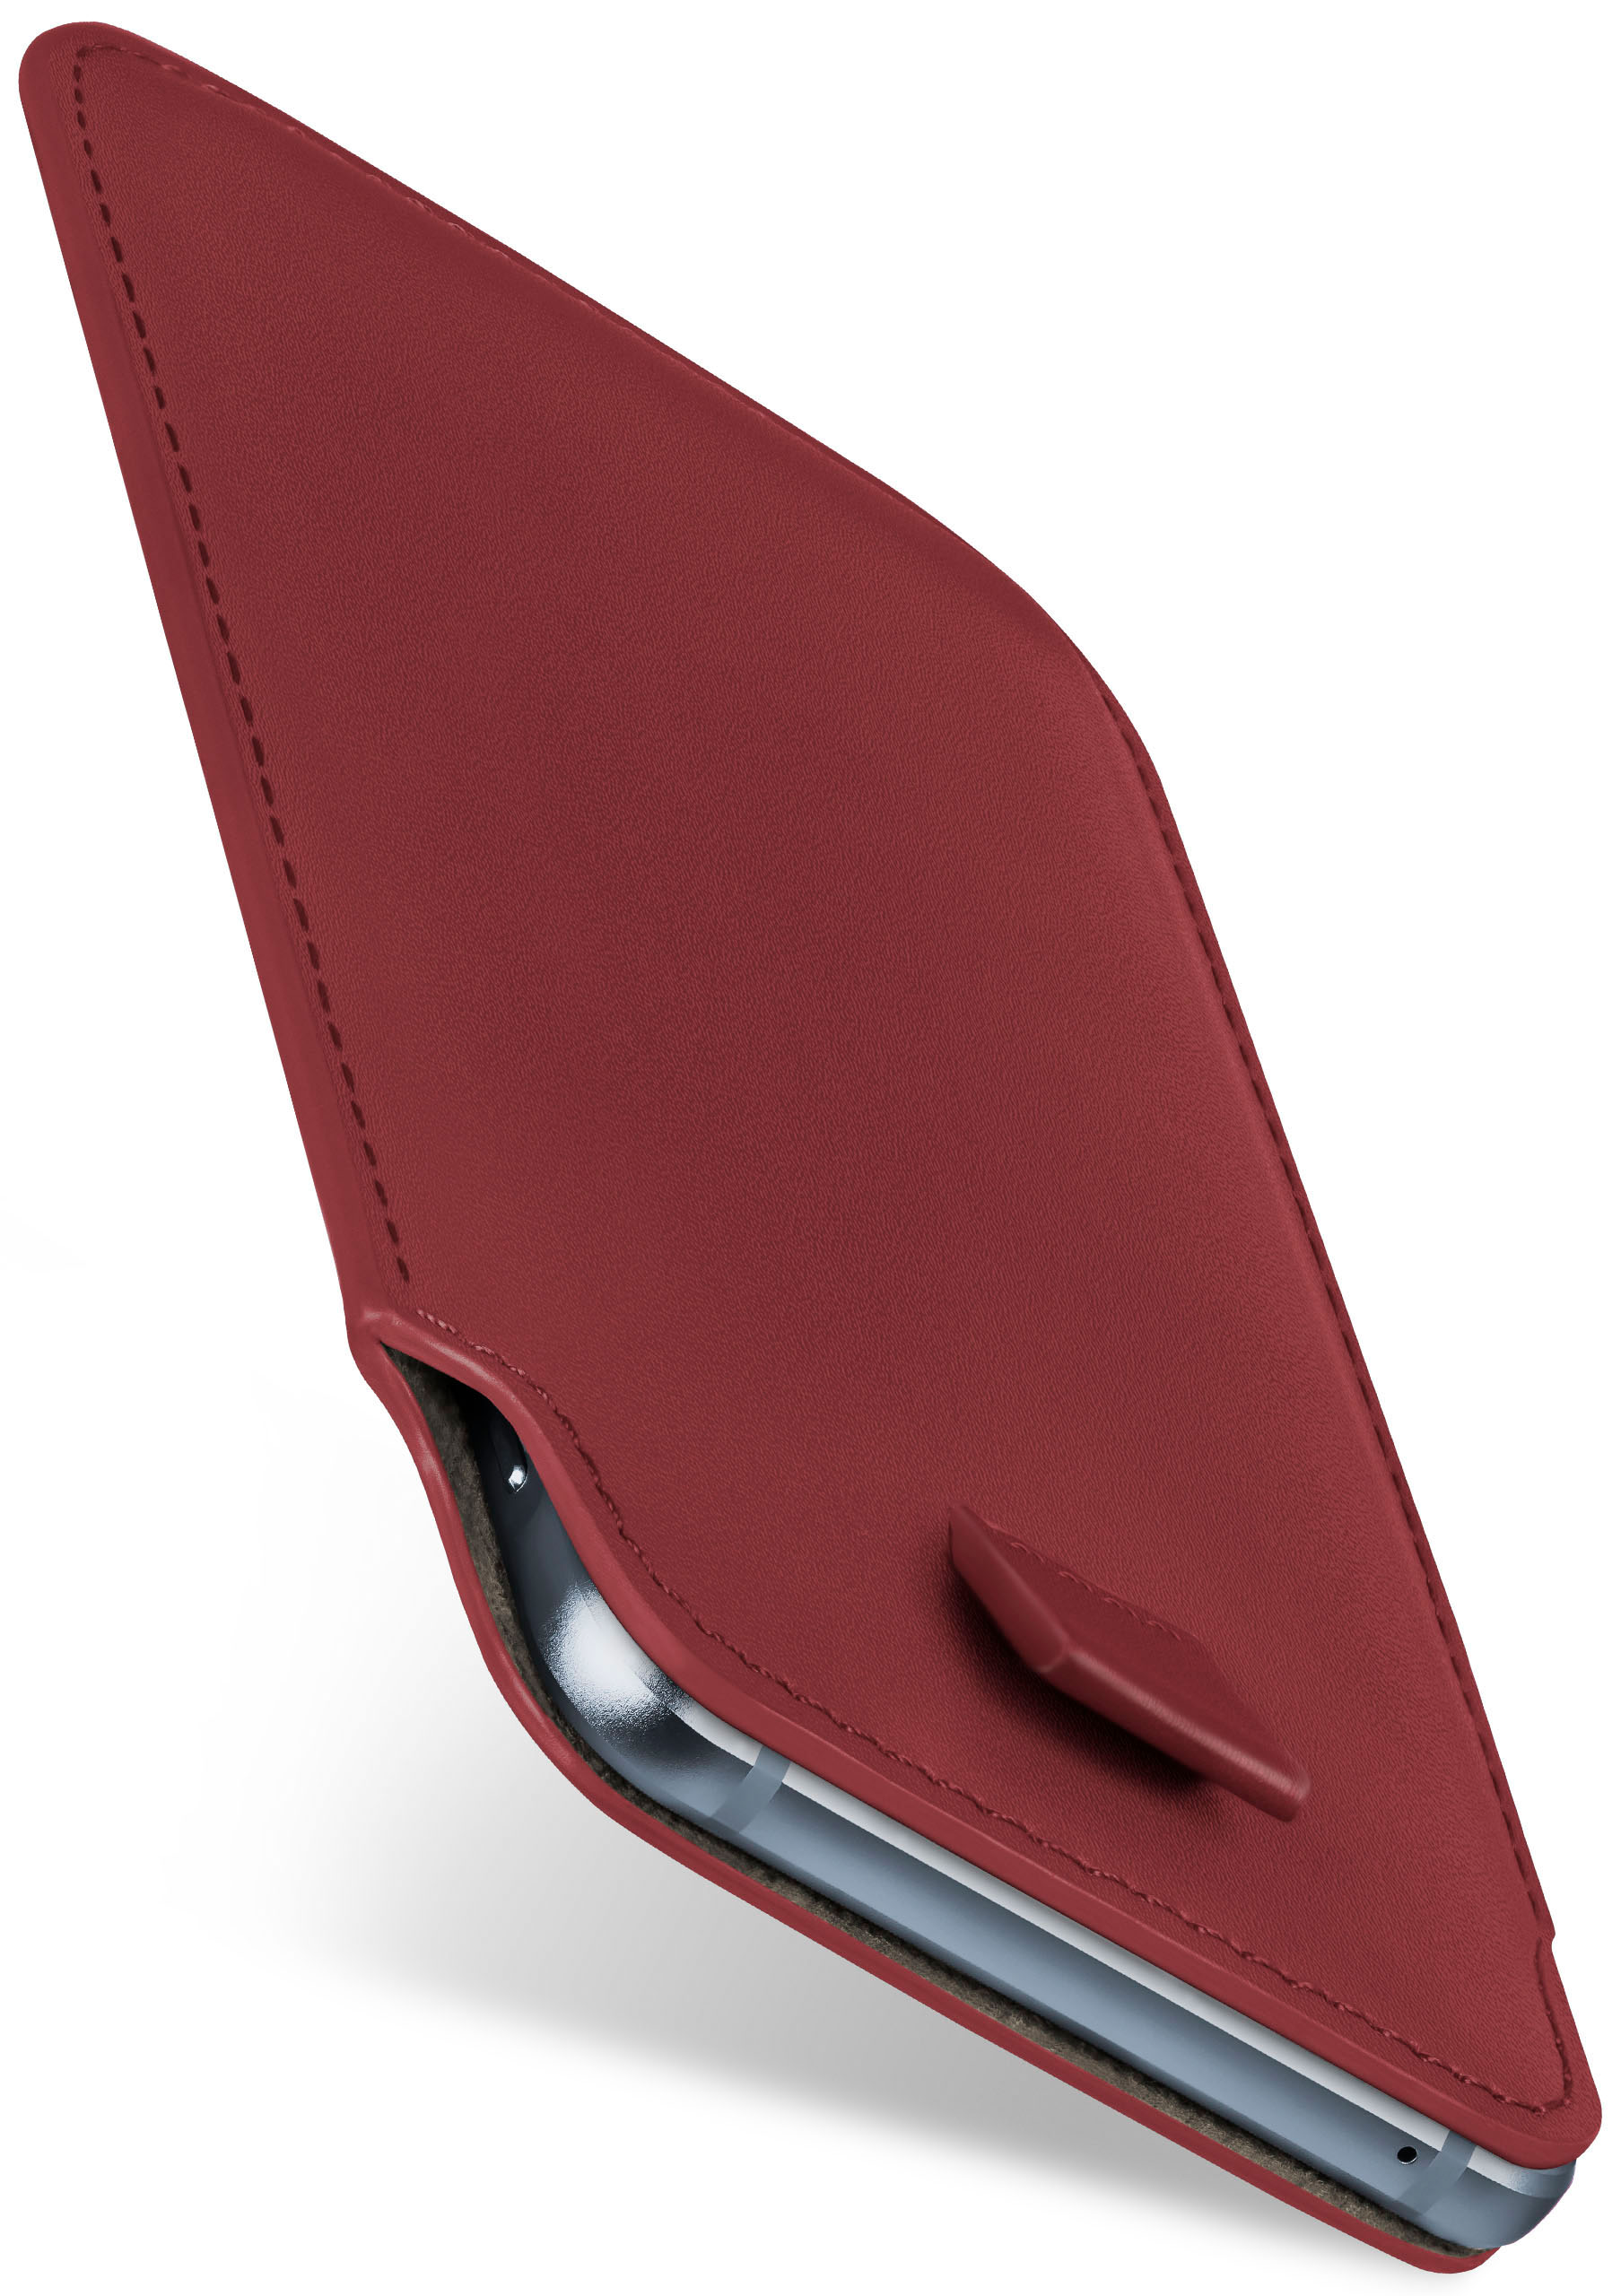 MOEX Slide Case, Full Cover, Xperia Maroon-Red Sony, L2